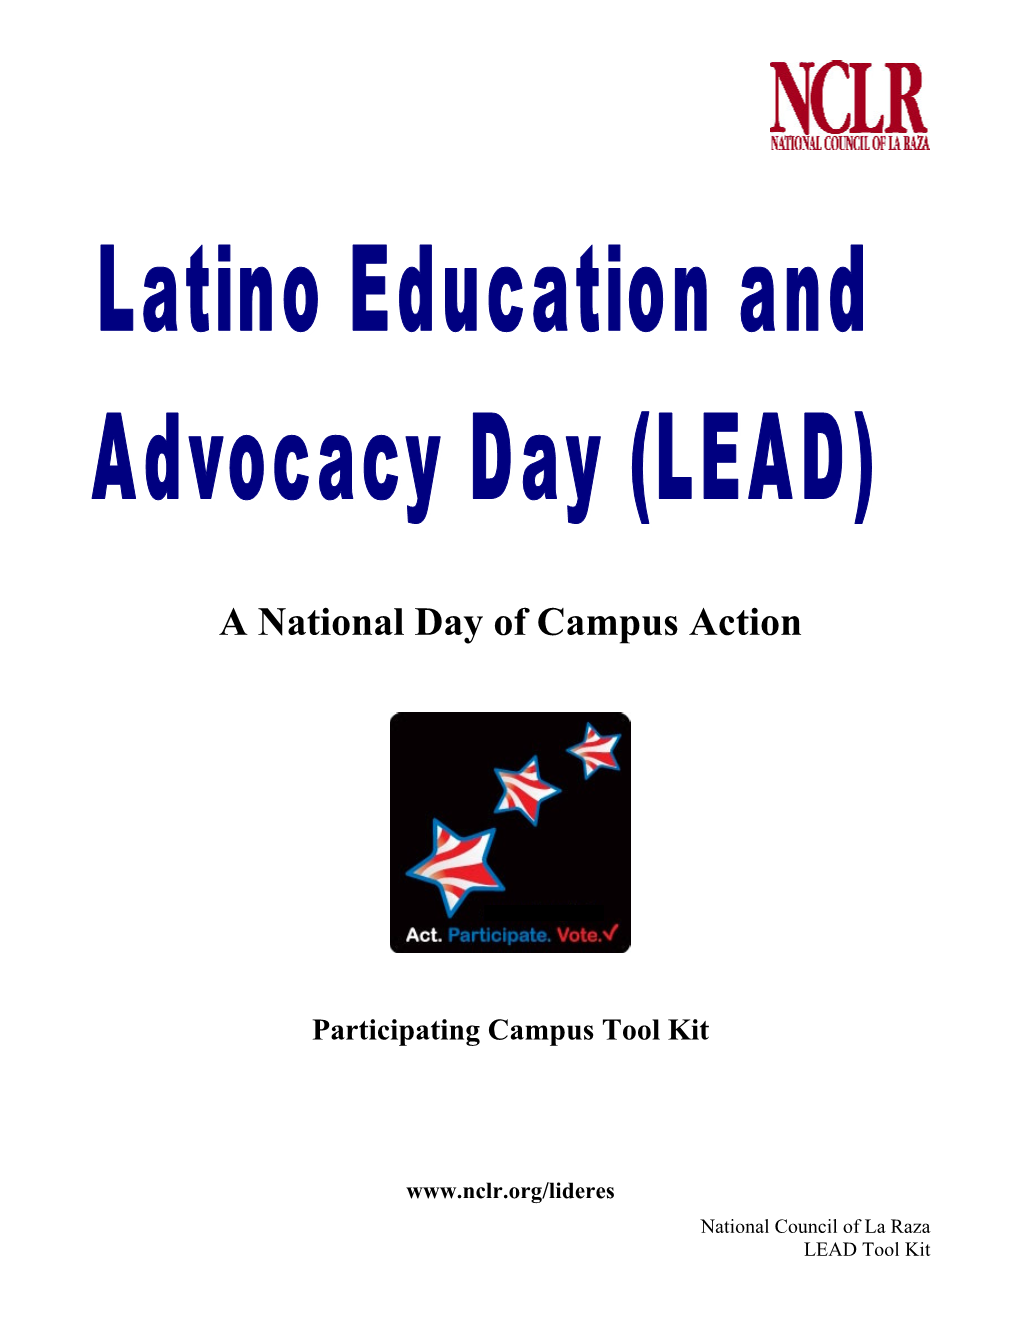 A National Day of Campus Action